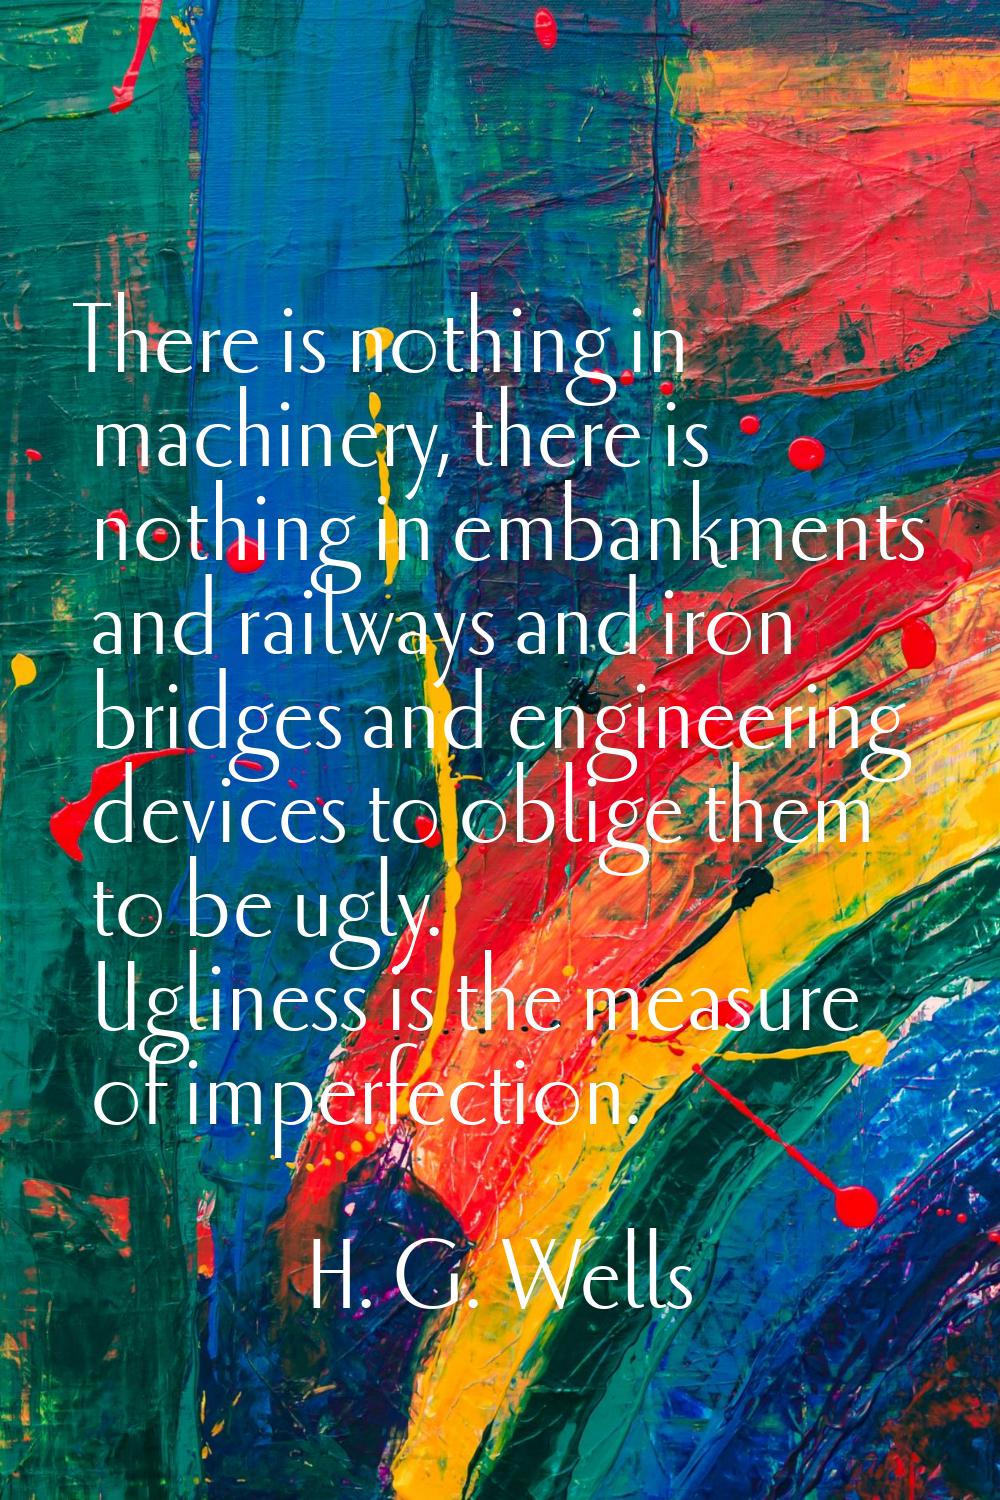 There is nothing in machinery, there is nothing in embankments and railways and iron bridges and en